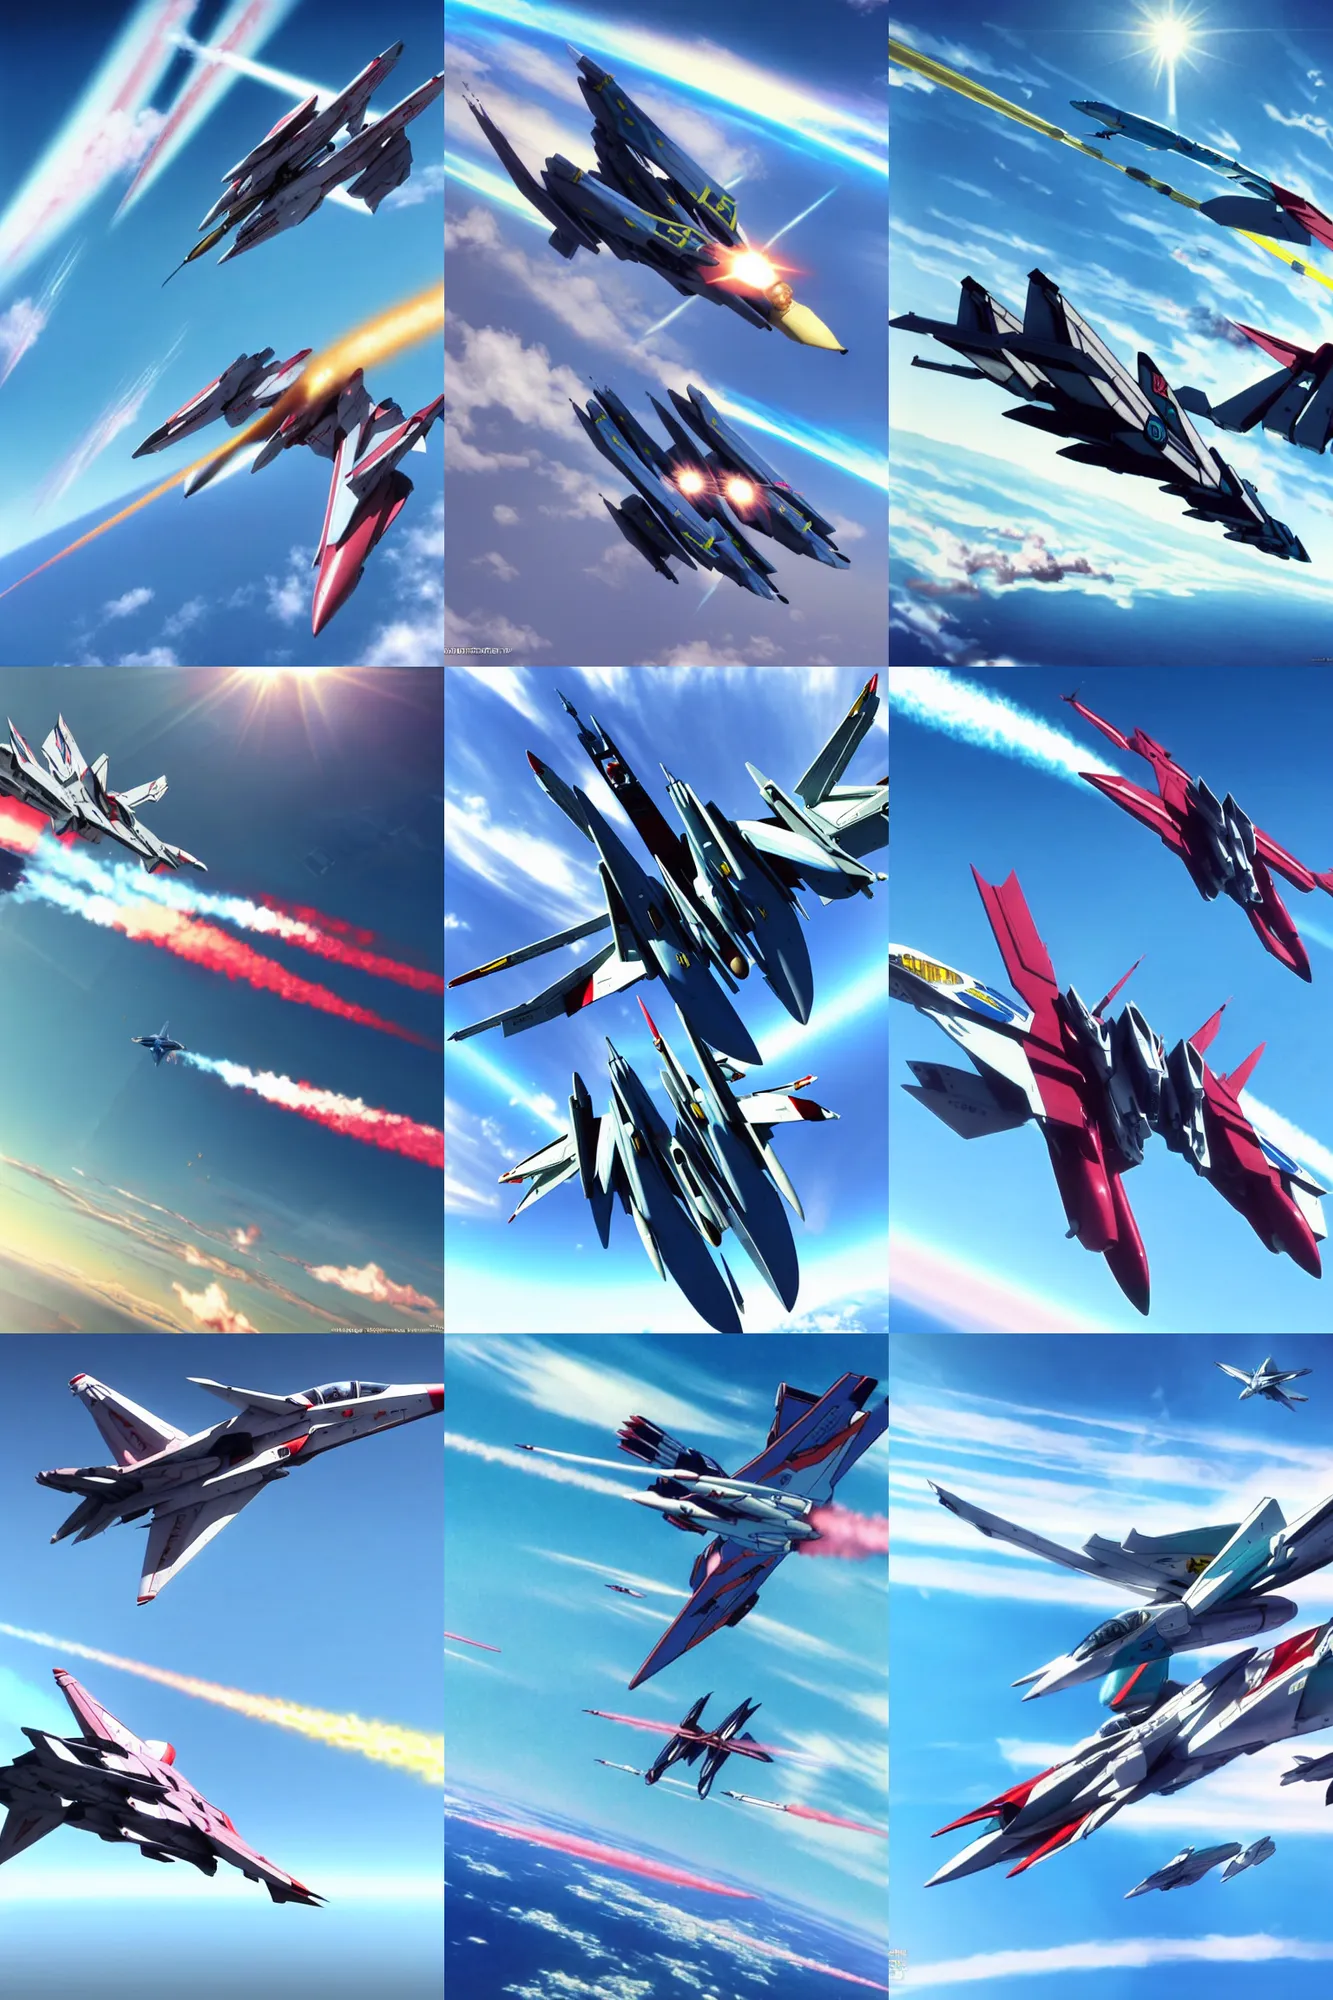 Prompt: An awe inspiring flight shot of a VF25 Messiah in Jet Mode soaring through the air on a sunny day with a clear blue sky, Macross Franchise, Macross Frontier, VF-25S Messiah, Valkyrie Mecha, Valkyrie Fighter Jet, sci-fi anime, 3D CGI, mecha anime, Shoji Kawamori